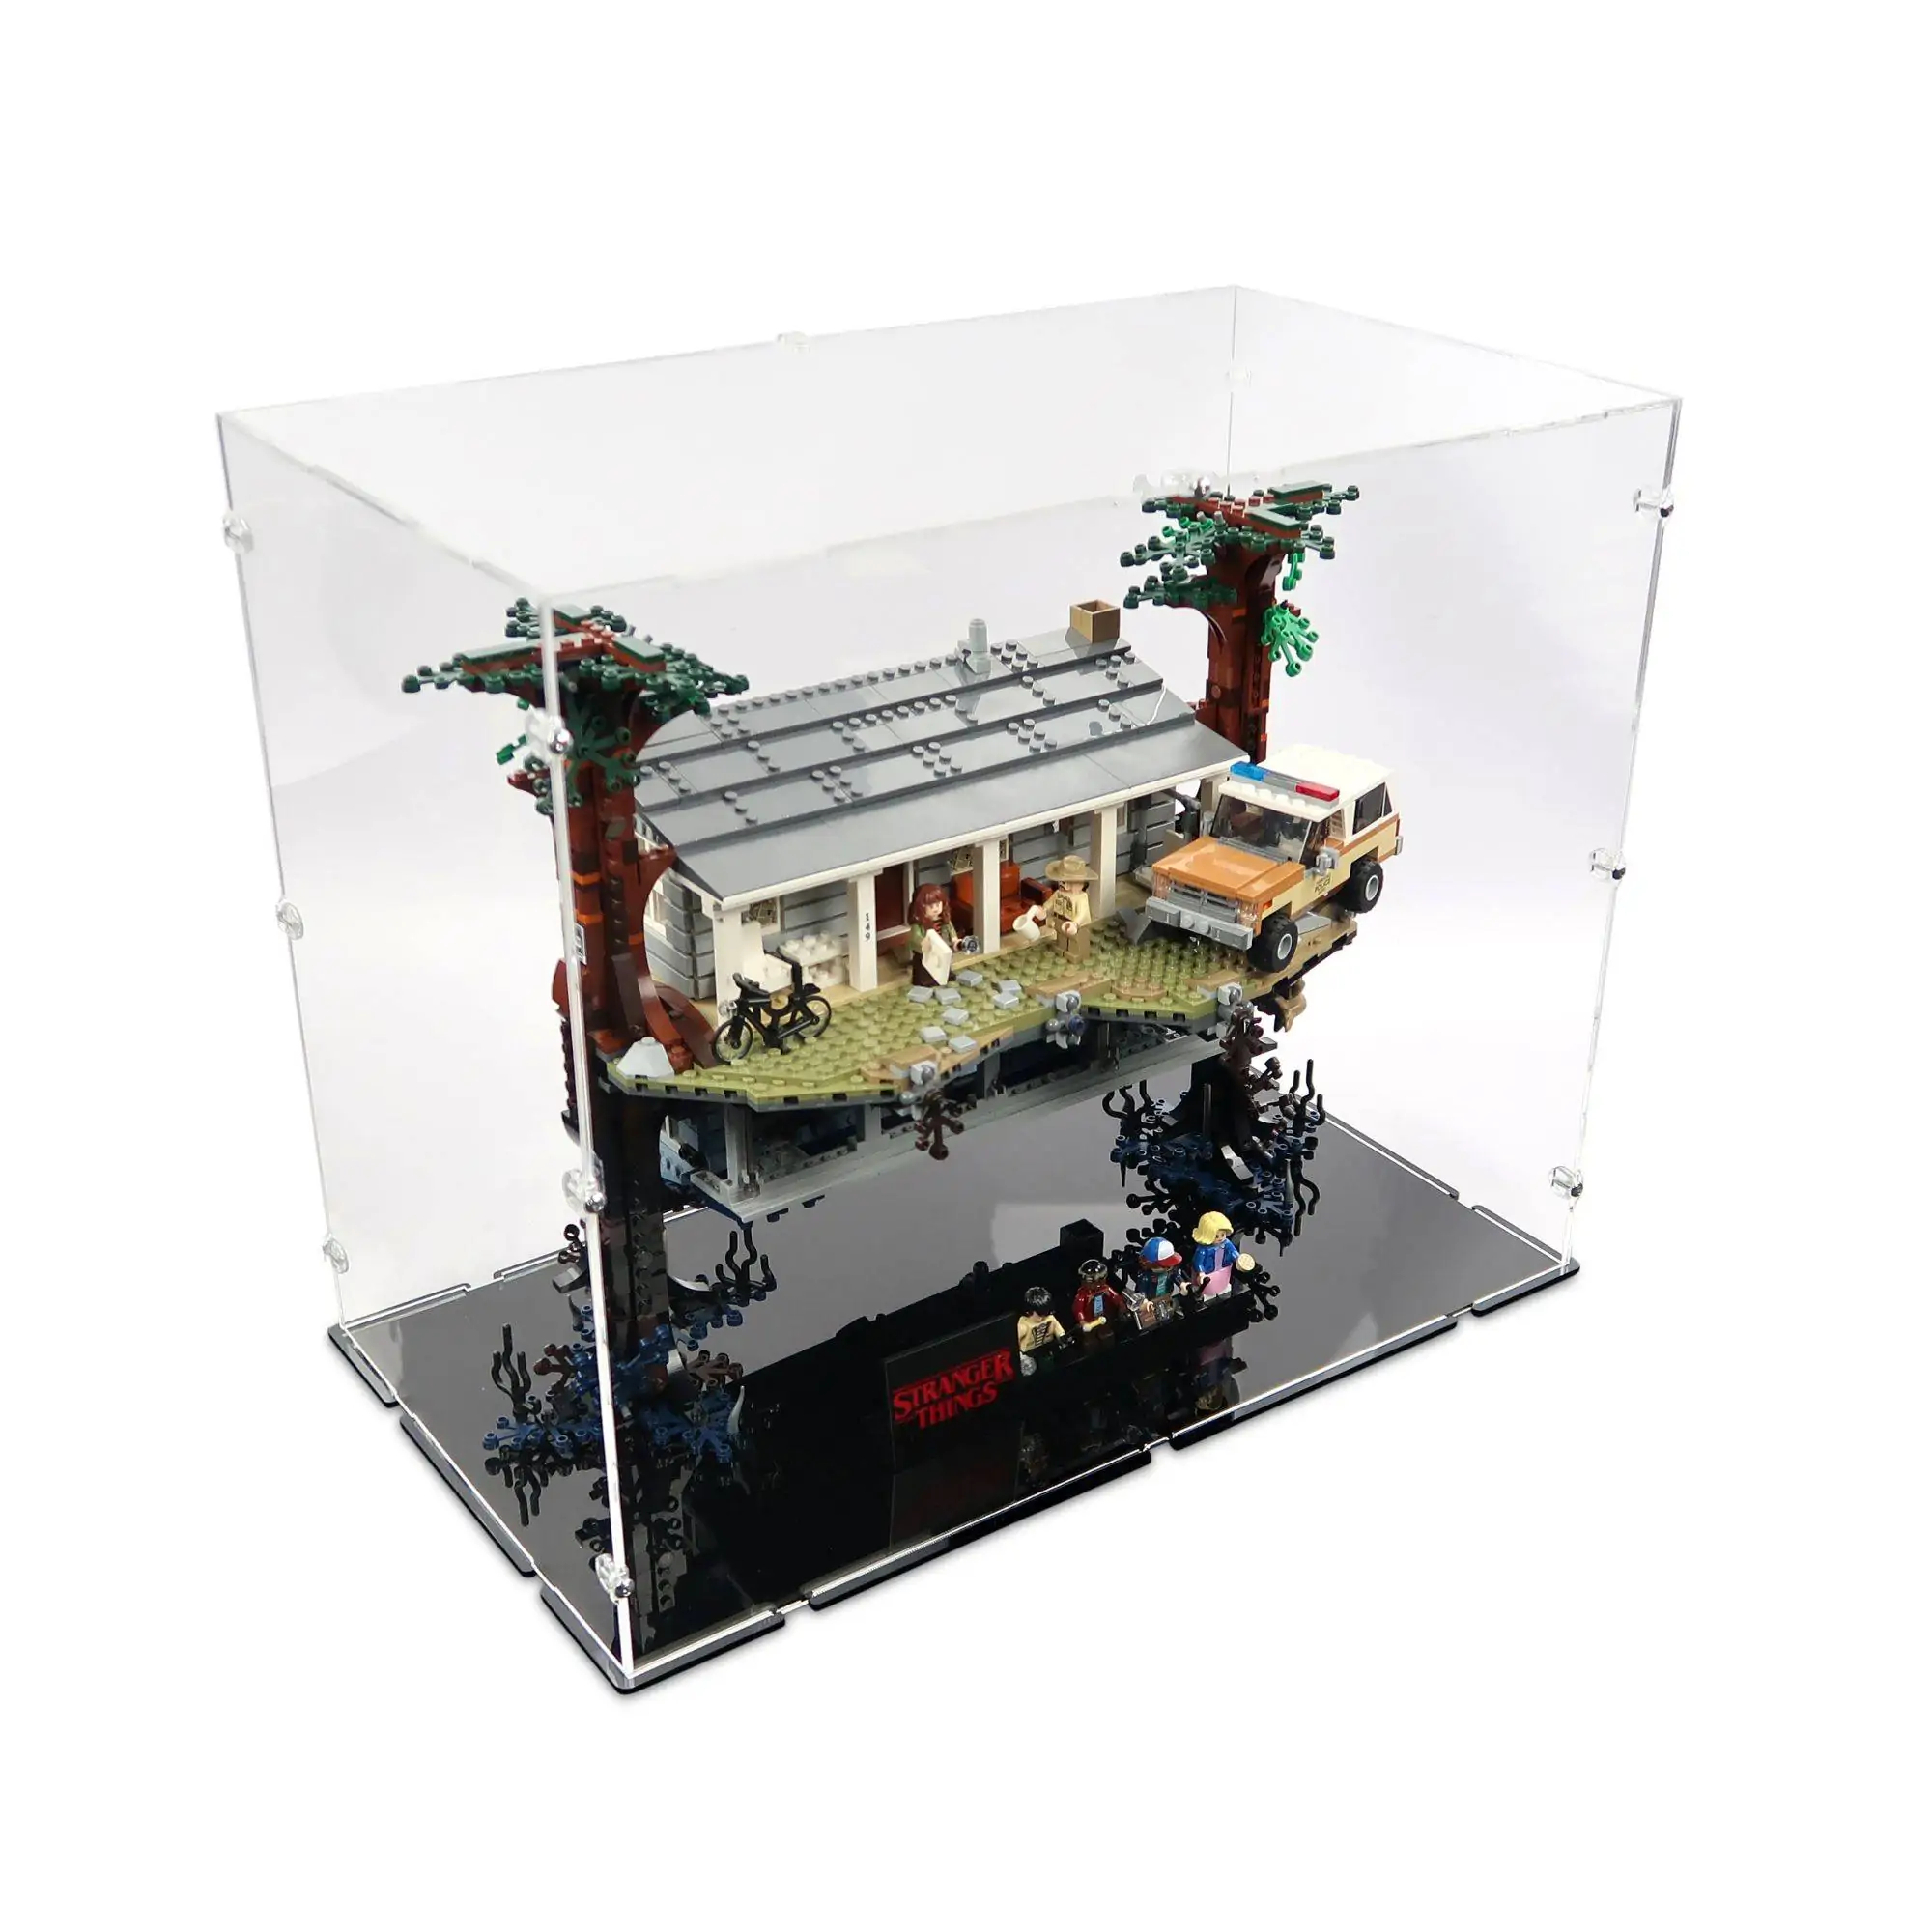 Acrylic Case for LEGO Upside Down Things) |